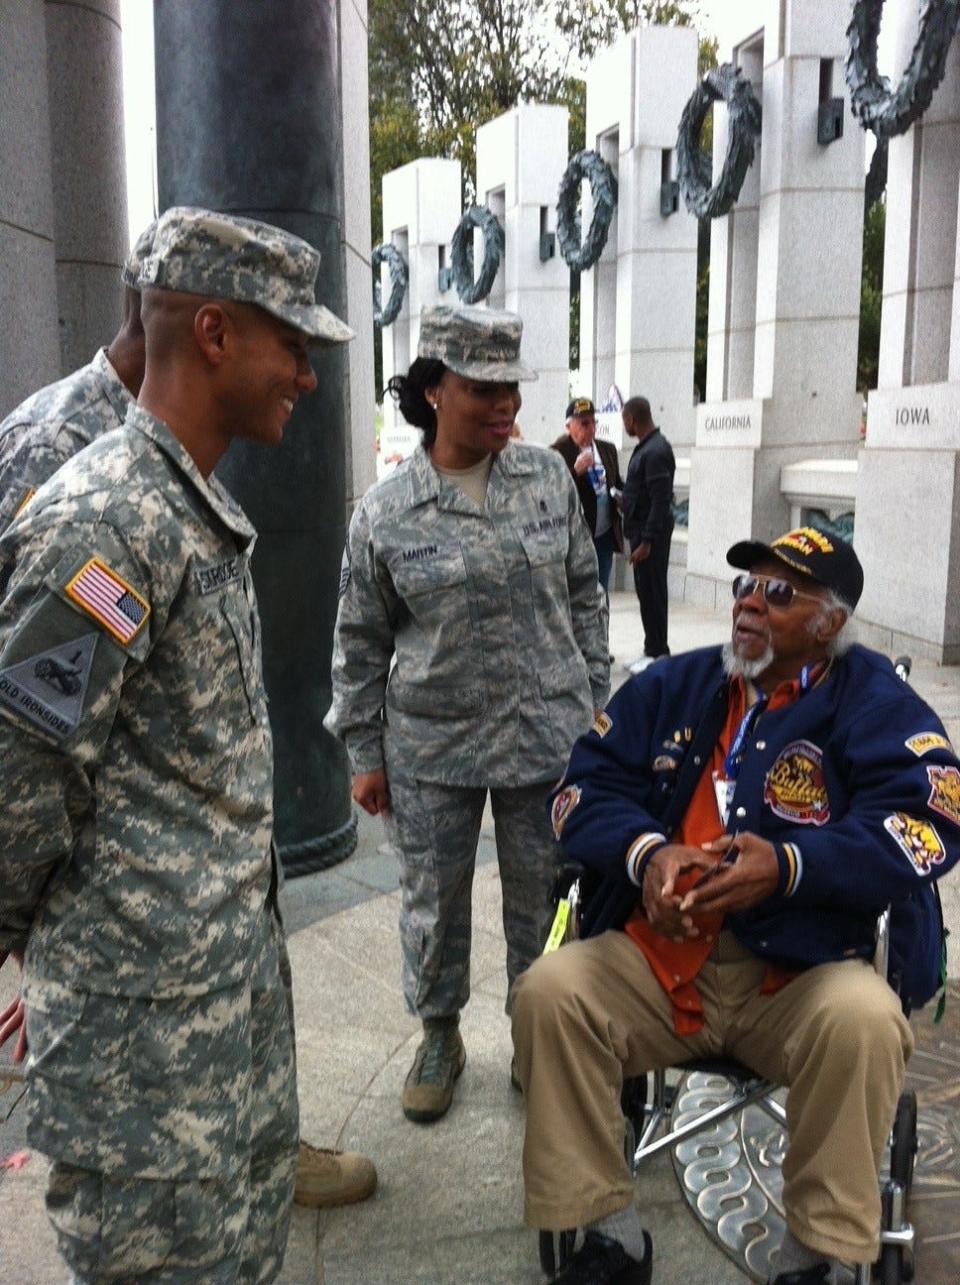 After the racism he faced both in combat and upon his return home, Thomas Bostick took a special interest in making sure Black soldiers and veterans were recognized for their service. In 1999, he was invited on an Honor Flight to Washington, D.C.